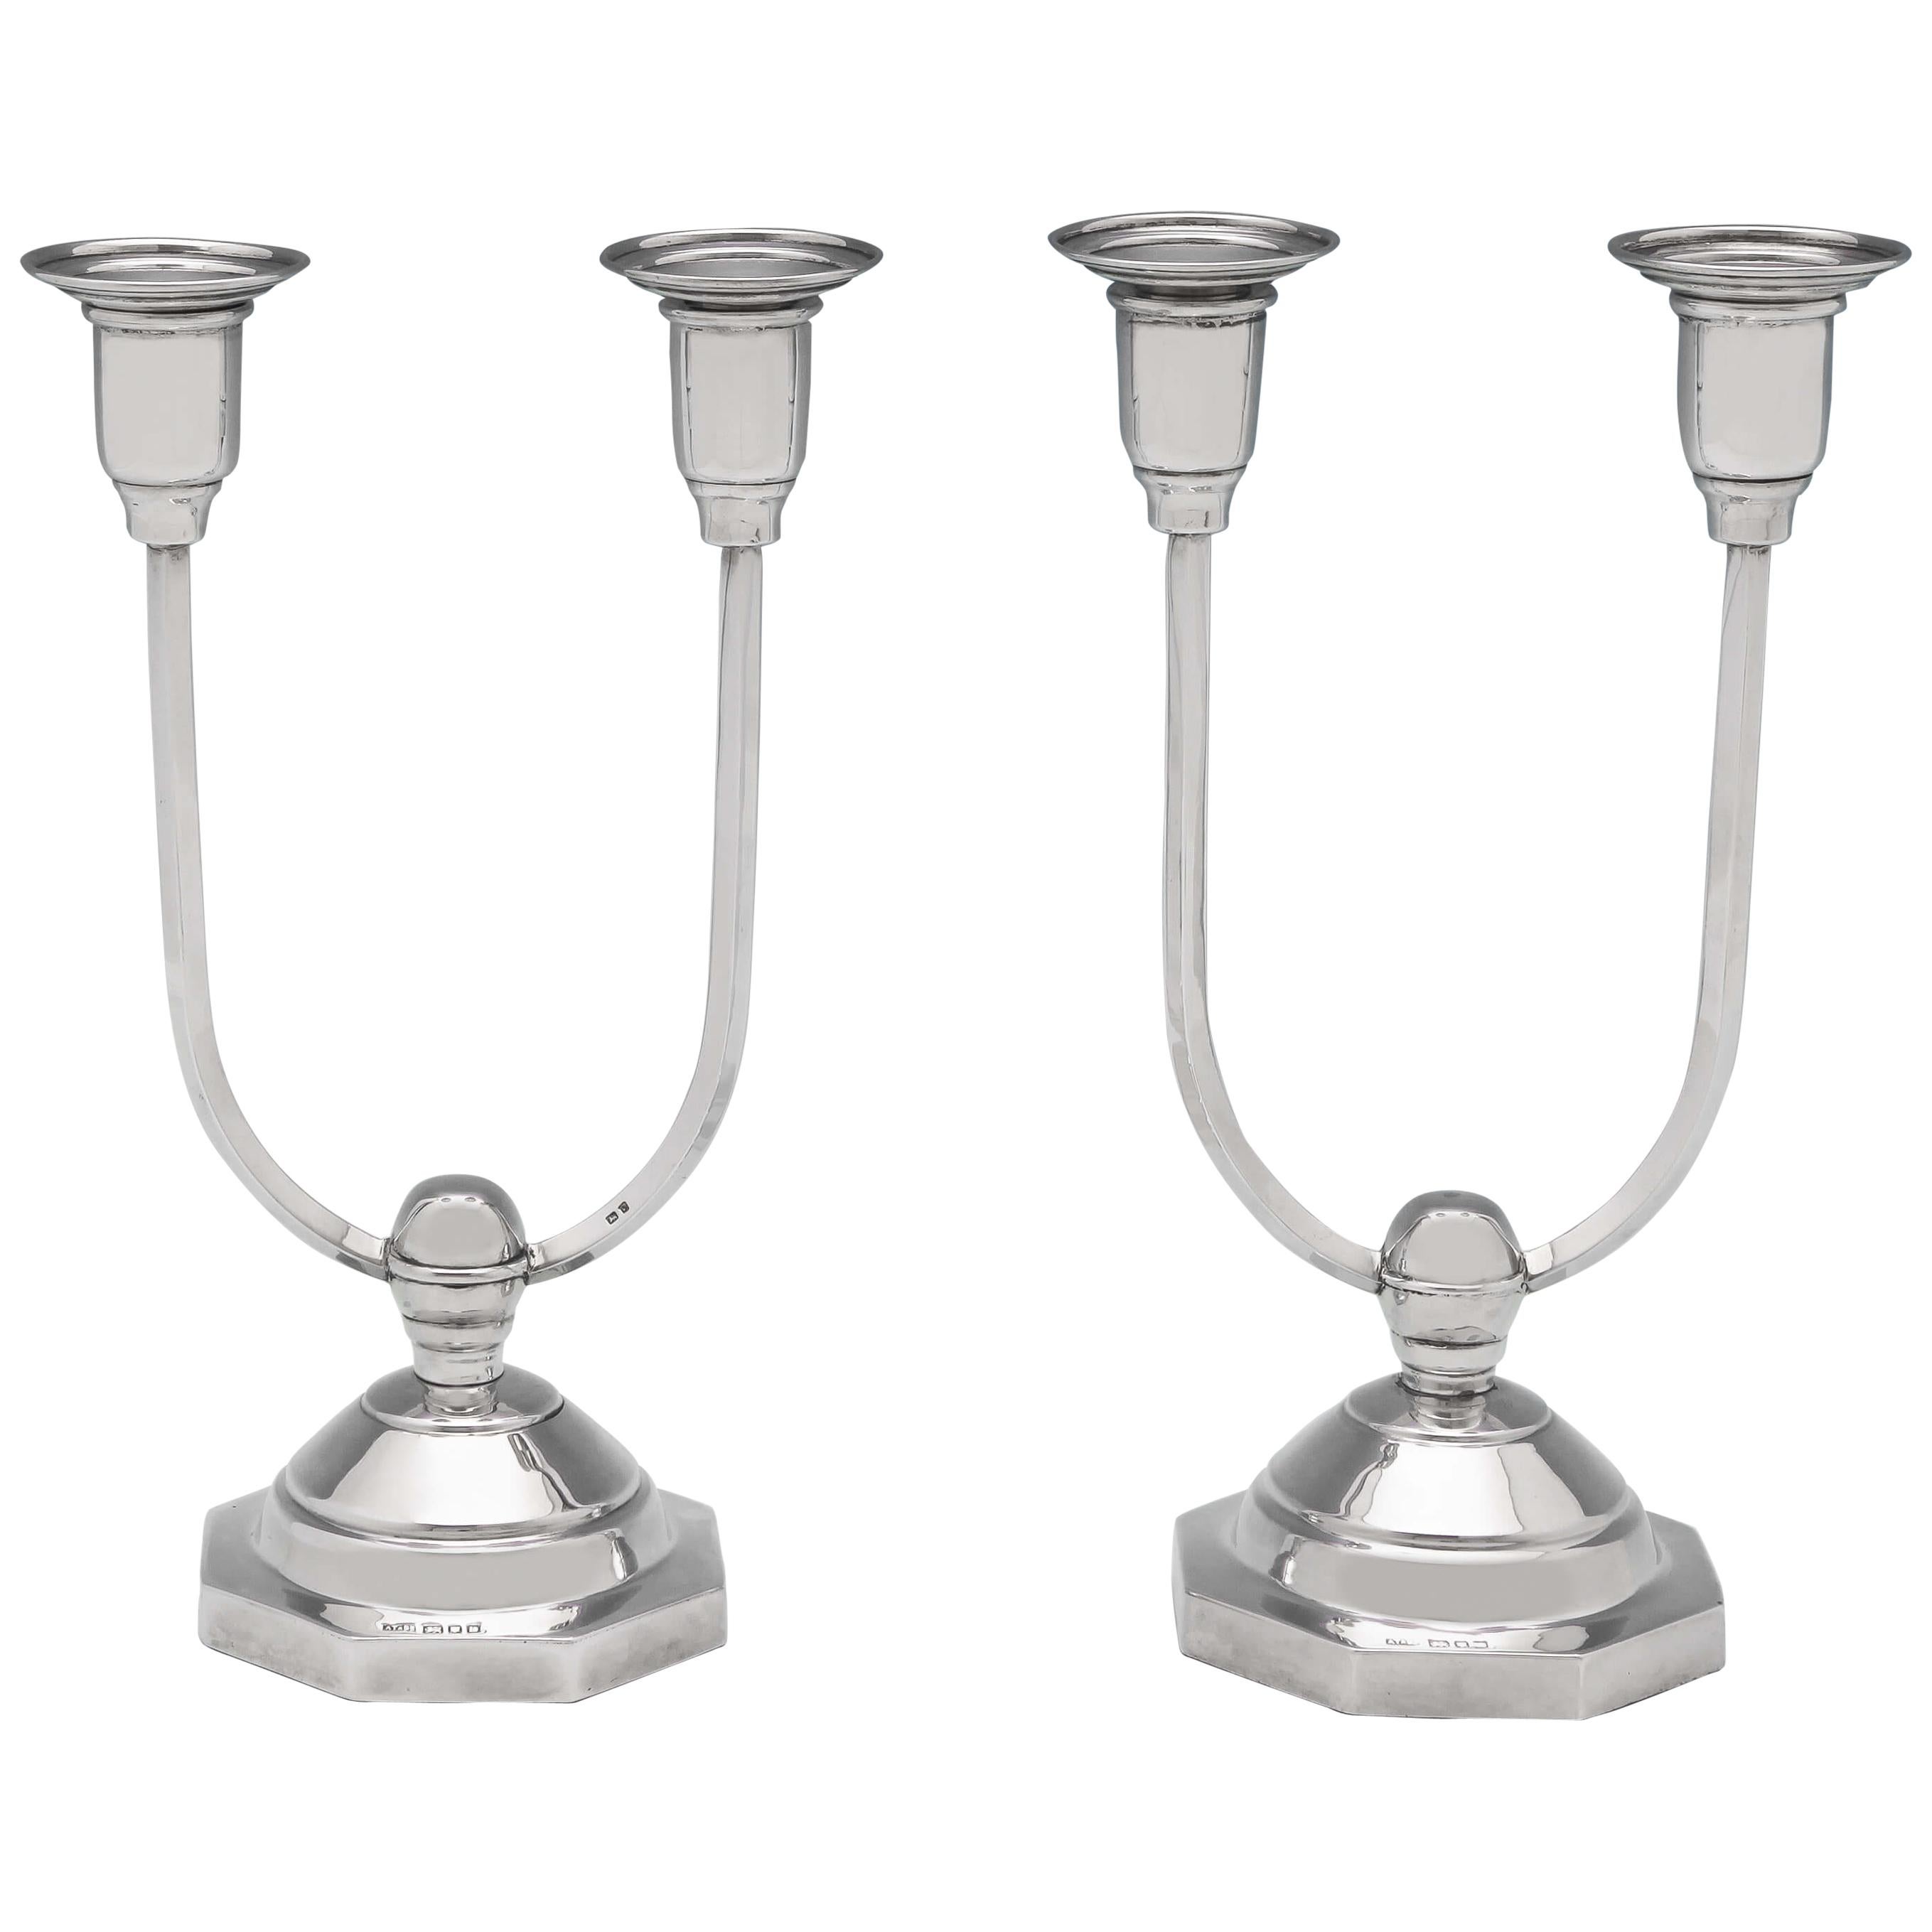 Art Deco Design Sterling Silver Pair of 2 Light Candelabra from London 1946